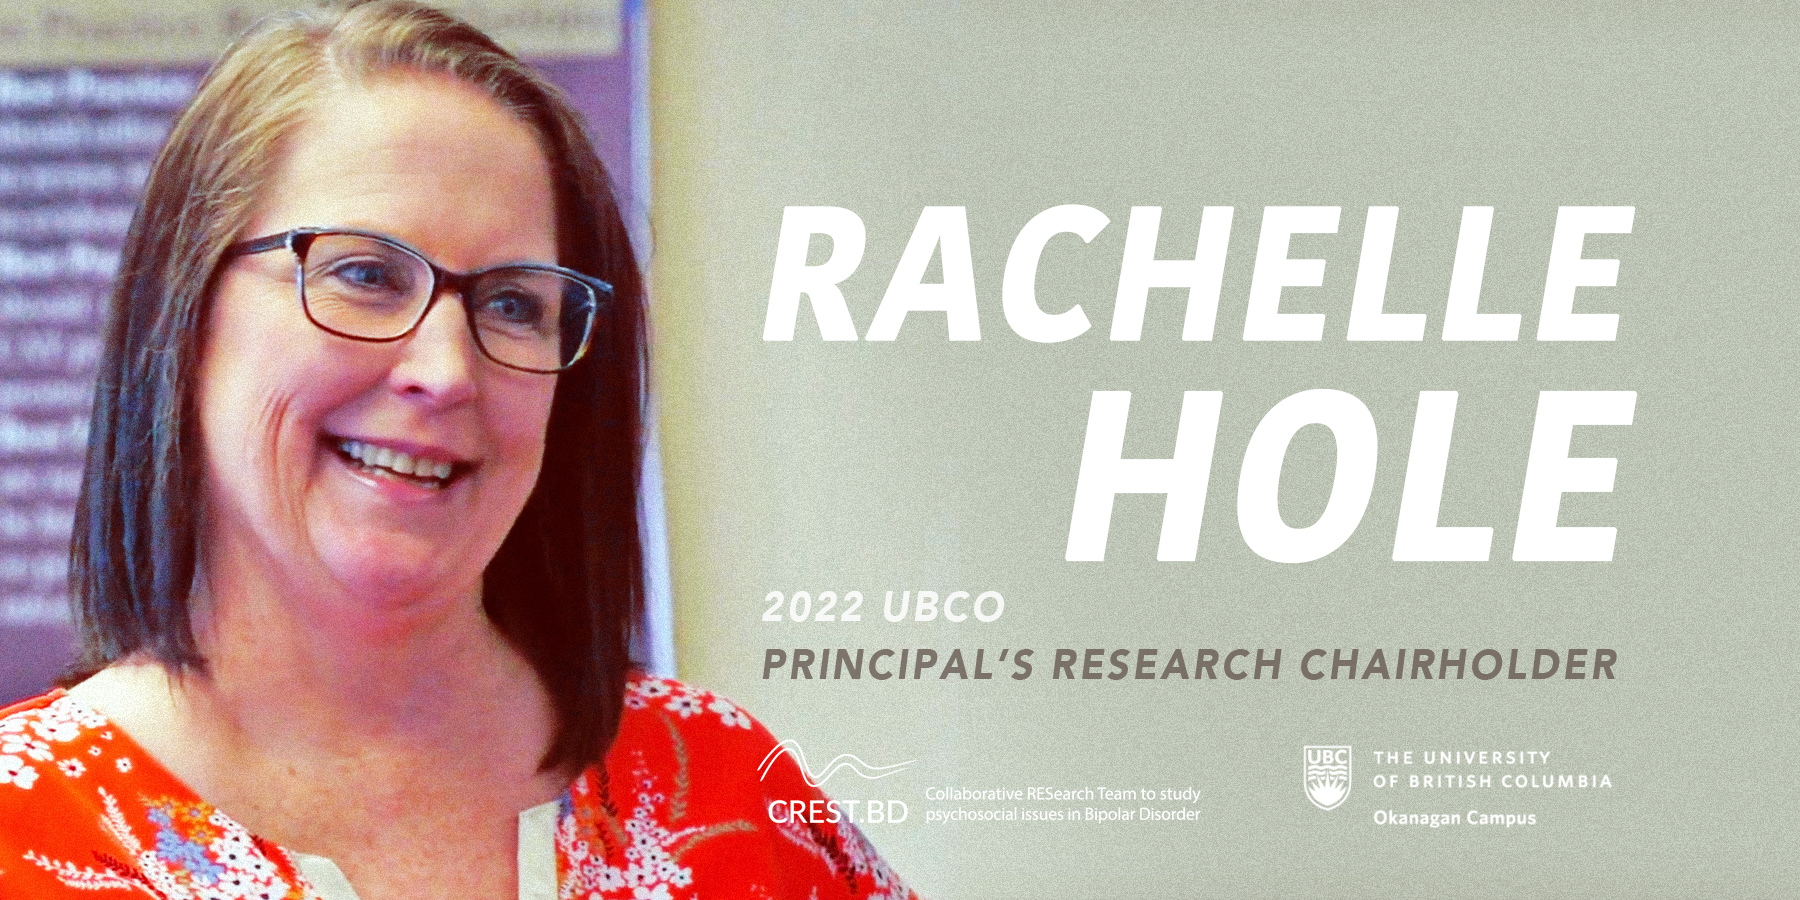 Rachelle Hole Appointed Tier 1 Research Chair at UBC Okanagan!